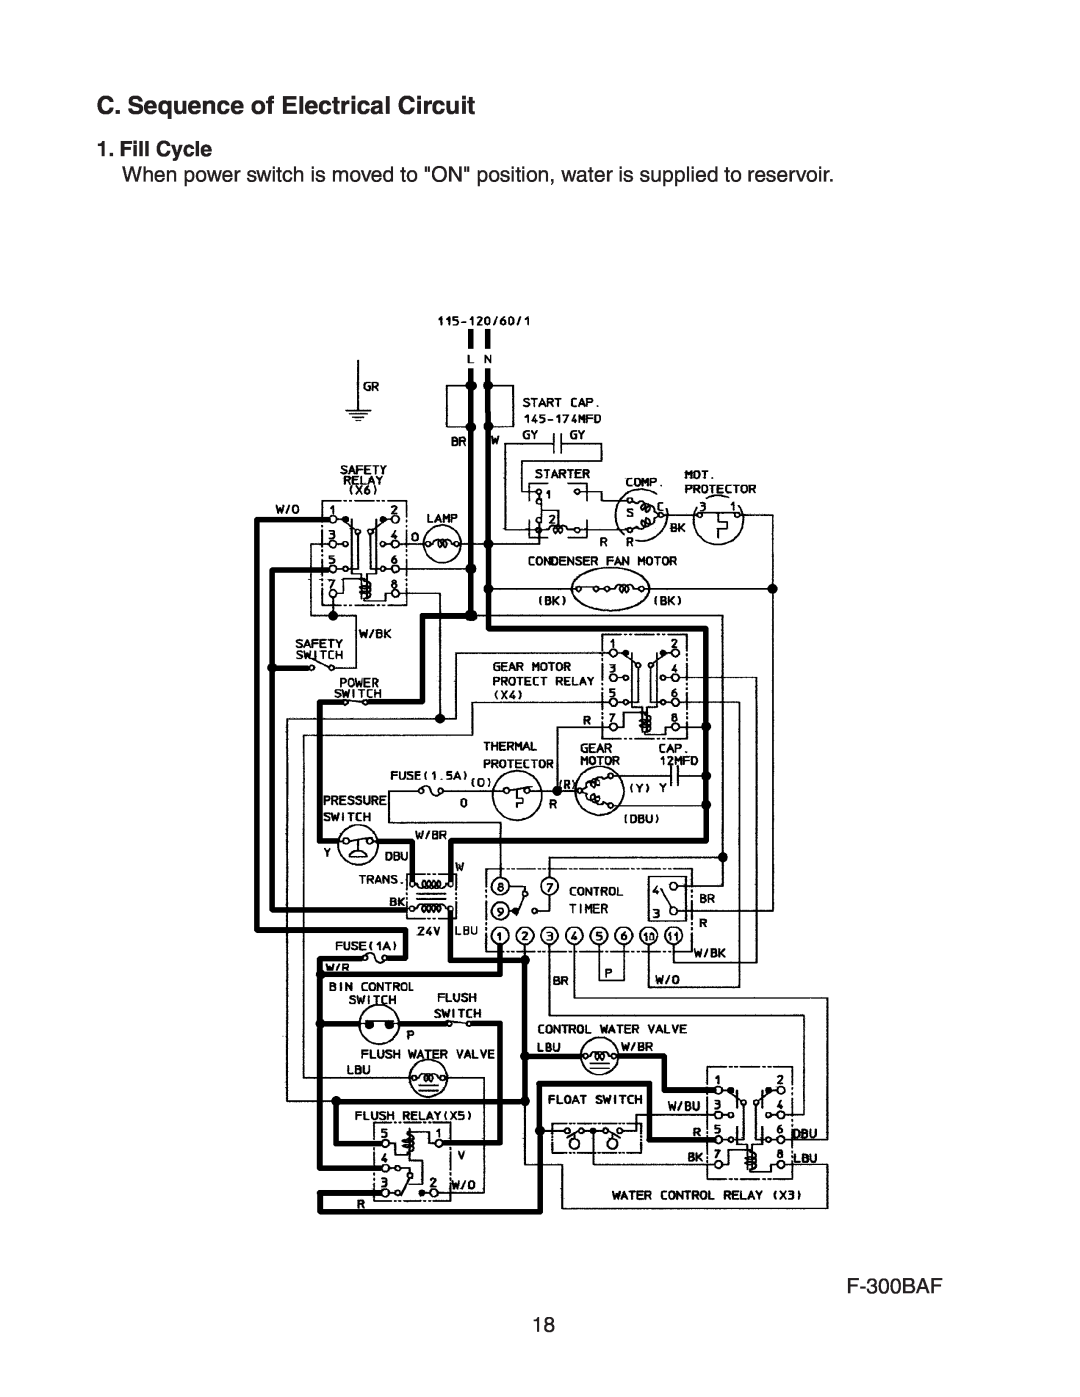 Hoshizaki F-300BAF service manual C. Sequence of Electrical Circuit, Fill Cycle 